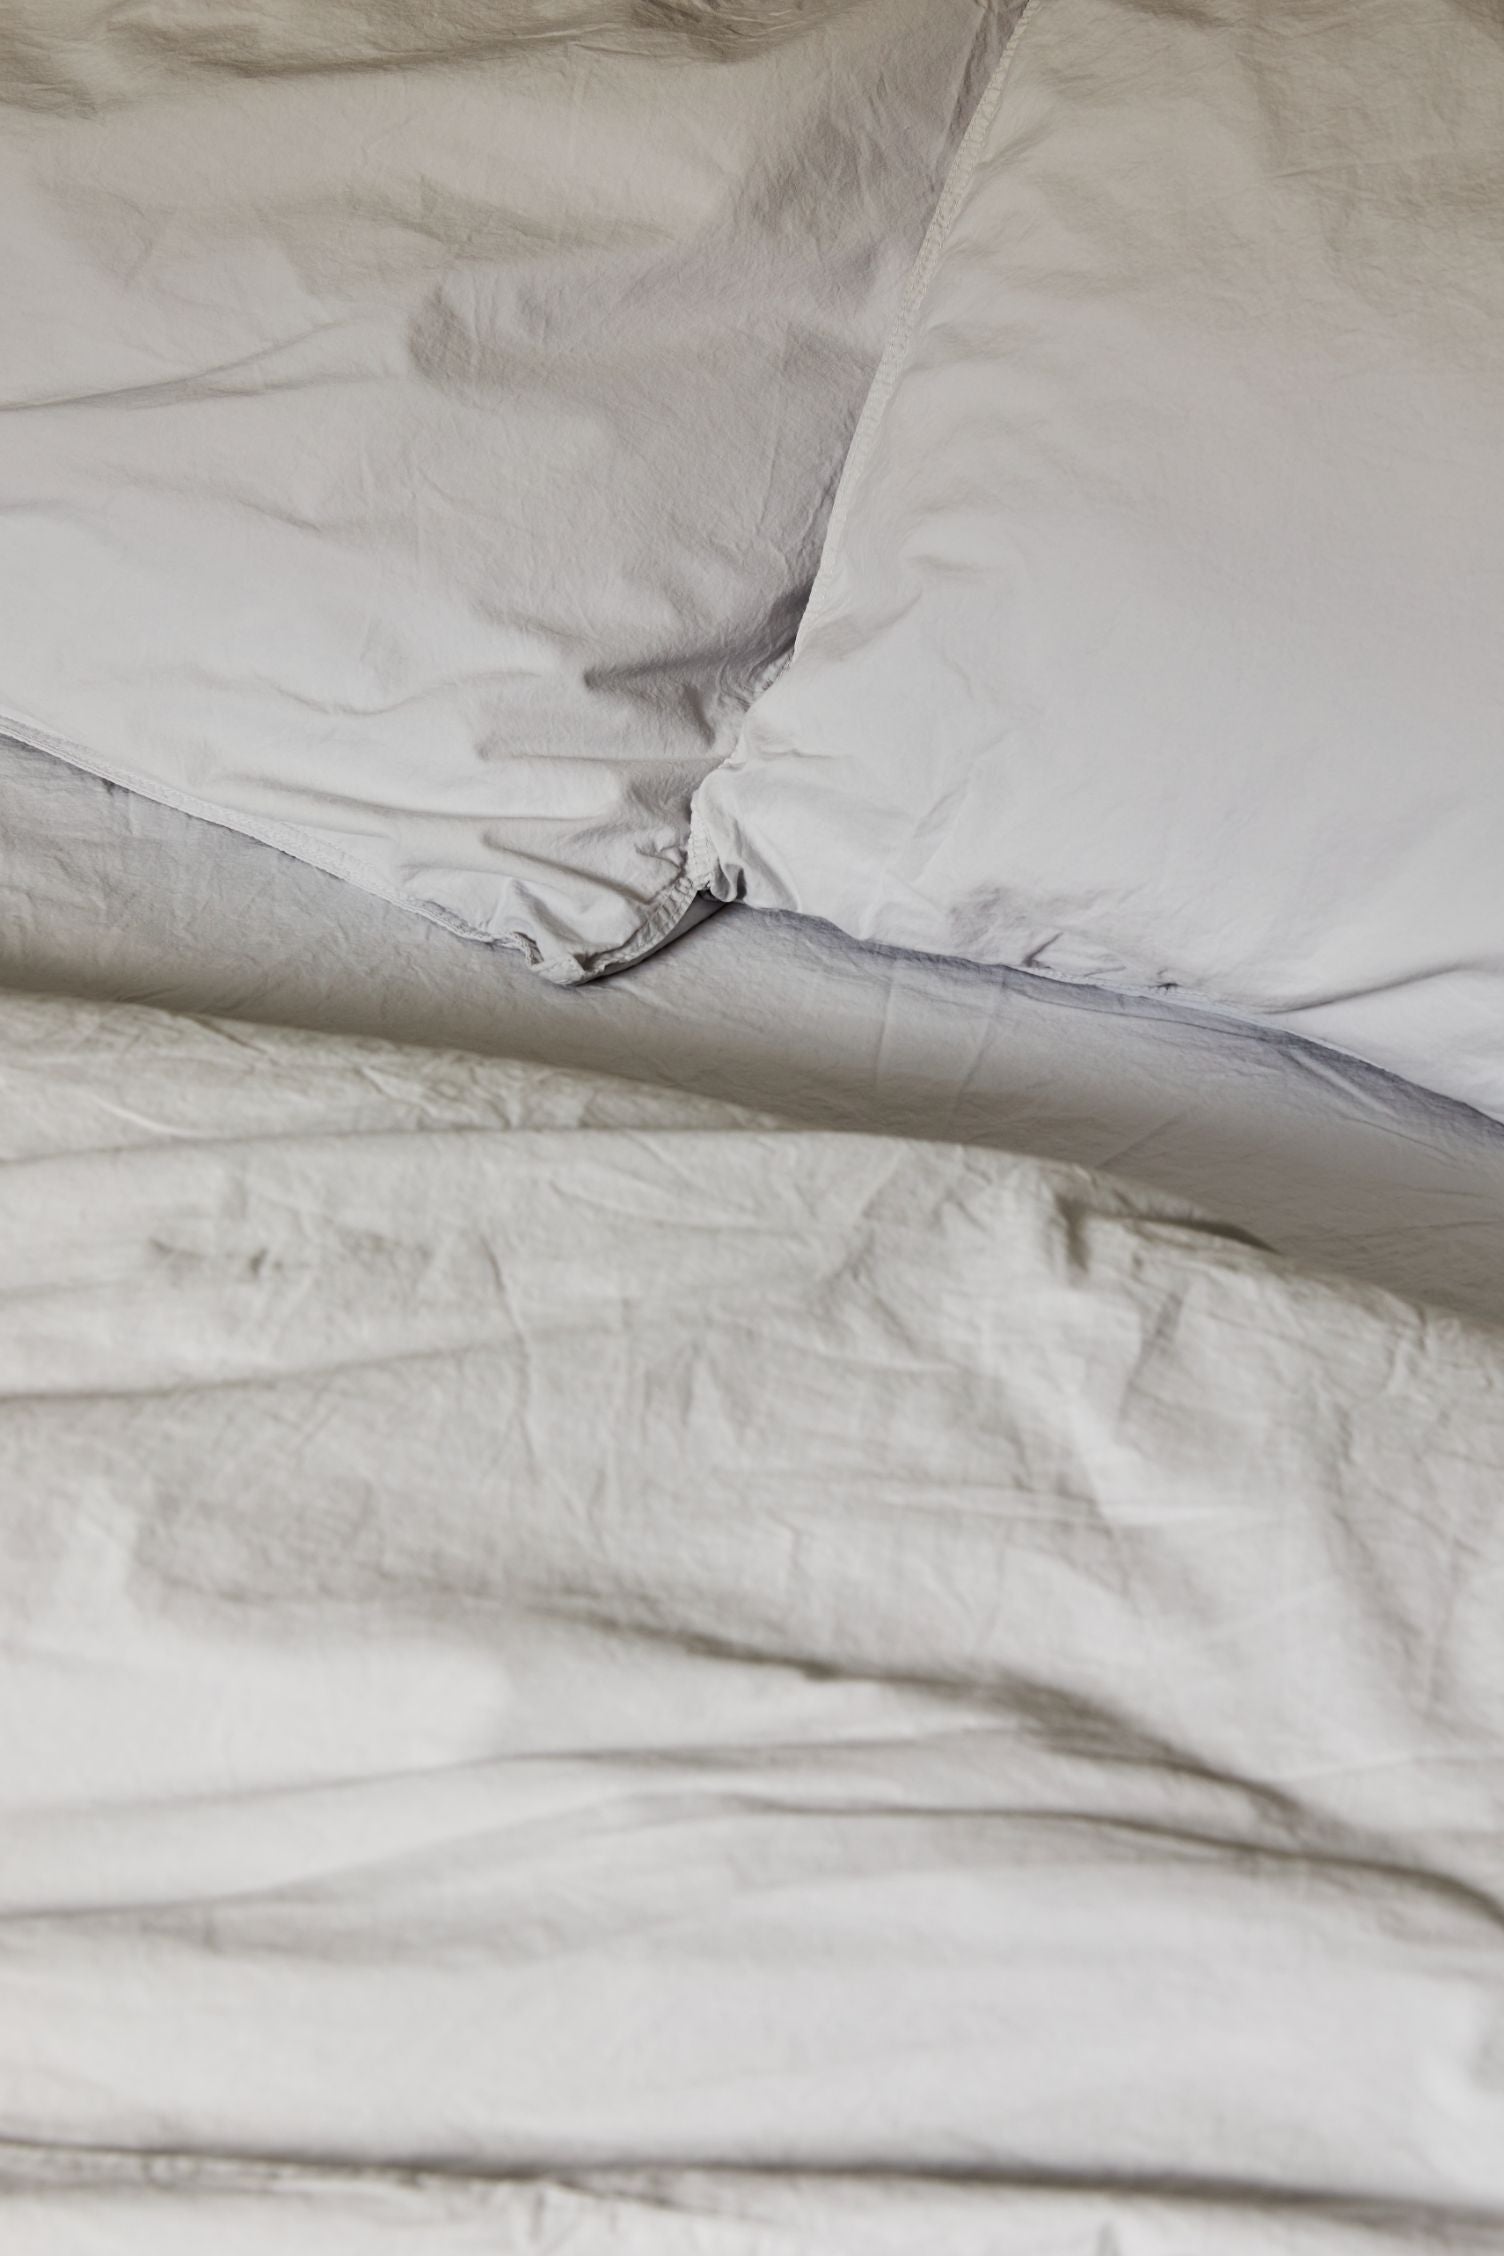 How To Choose Bedding Colors